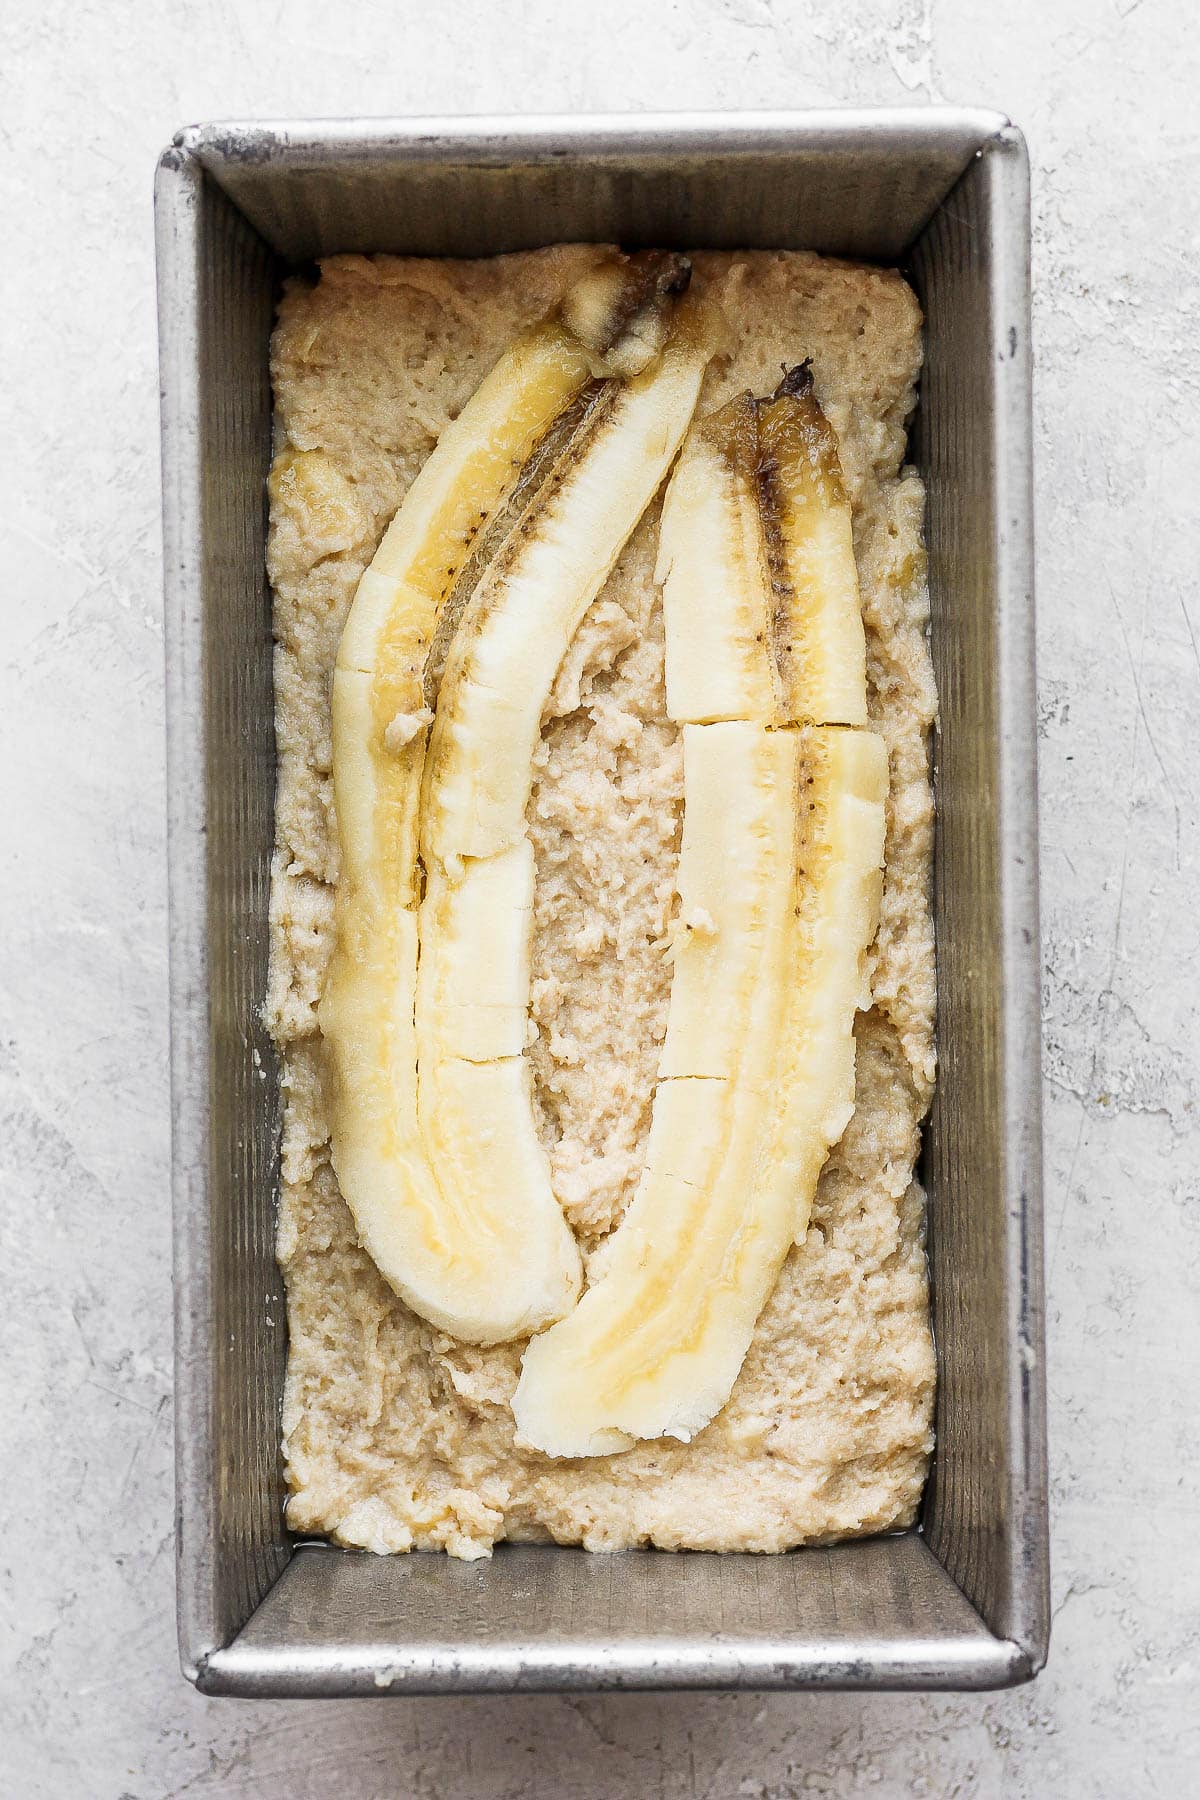 Paleo banana bread batter with a sliced banana on top for garnish in a loaf pan.